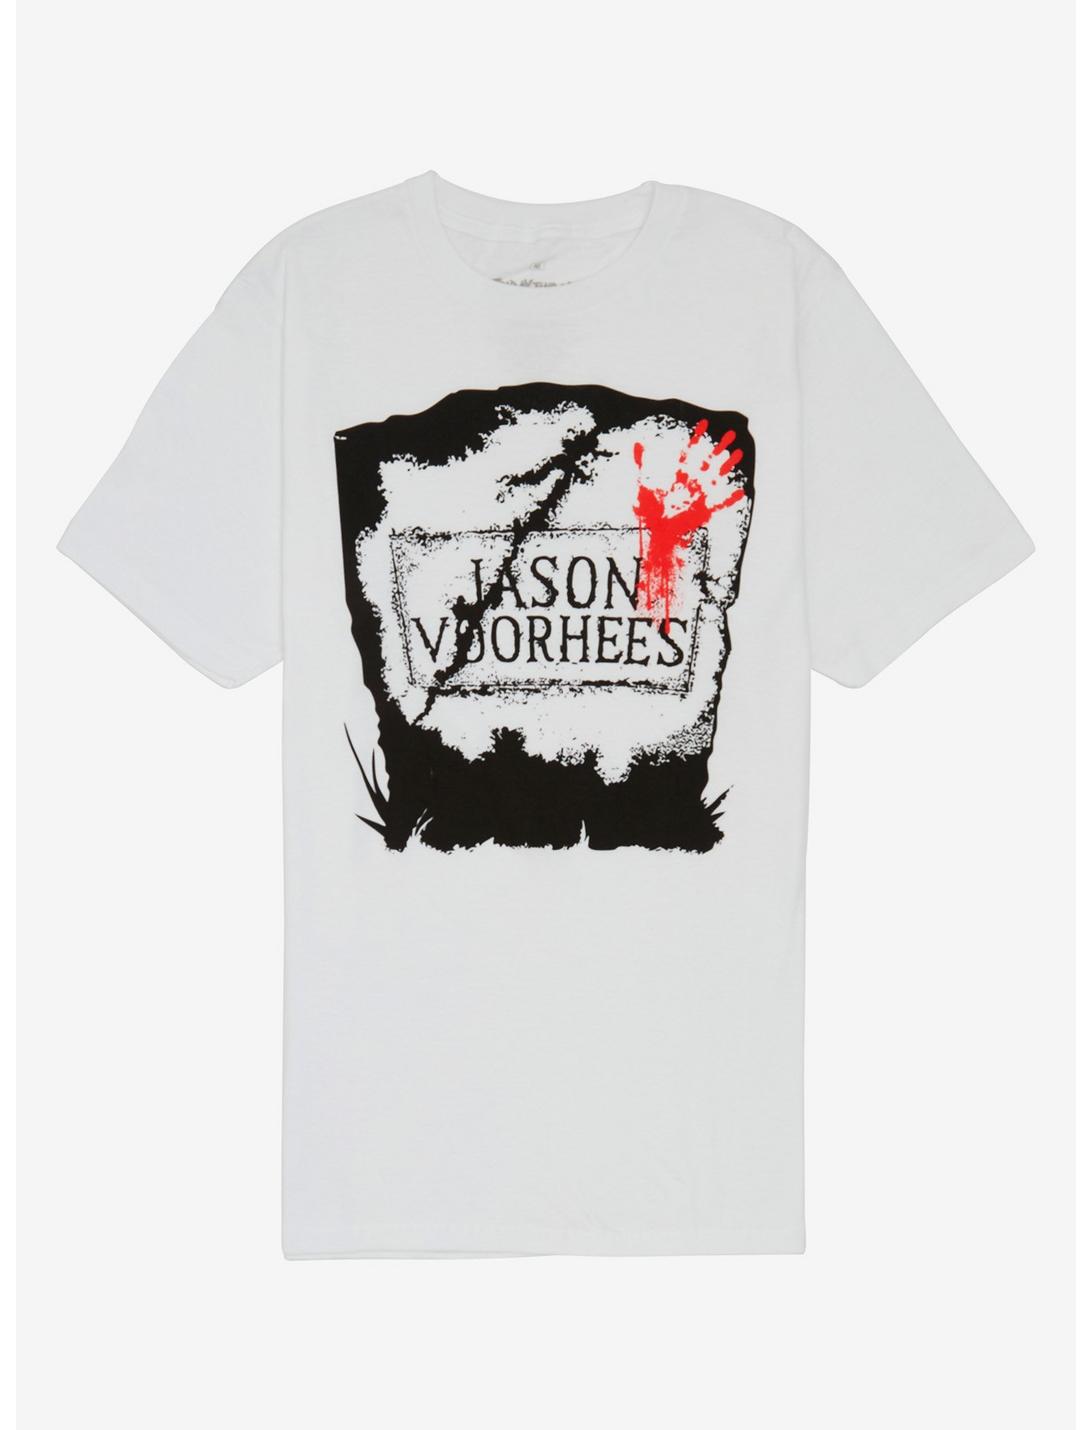 Friday The 13th Jason Voorhees Gravestone T-Shirt | Hot Topic